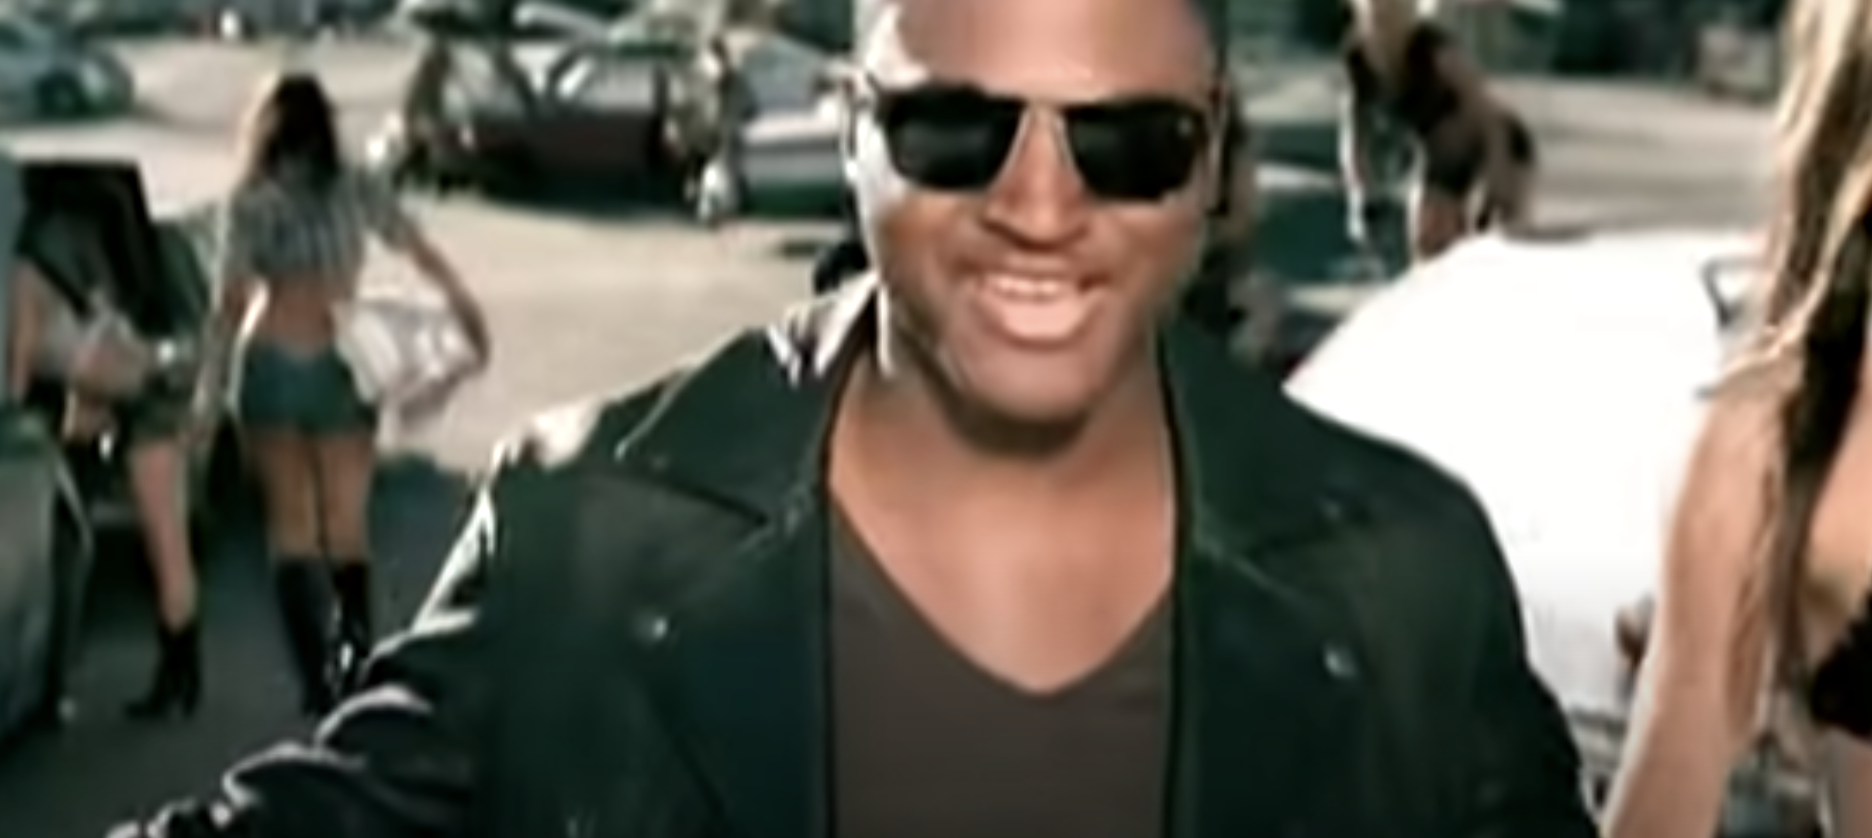 Taio walking down the street and singing